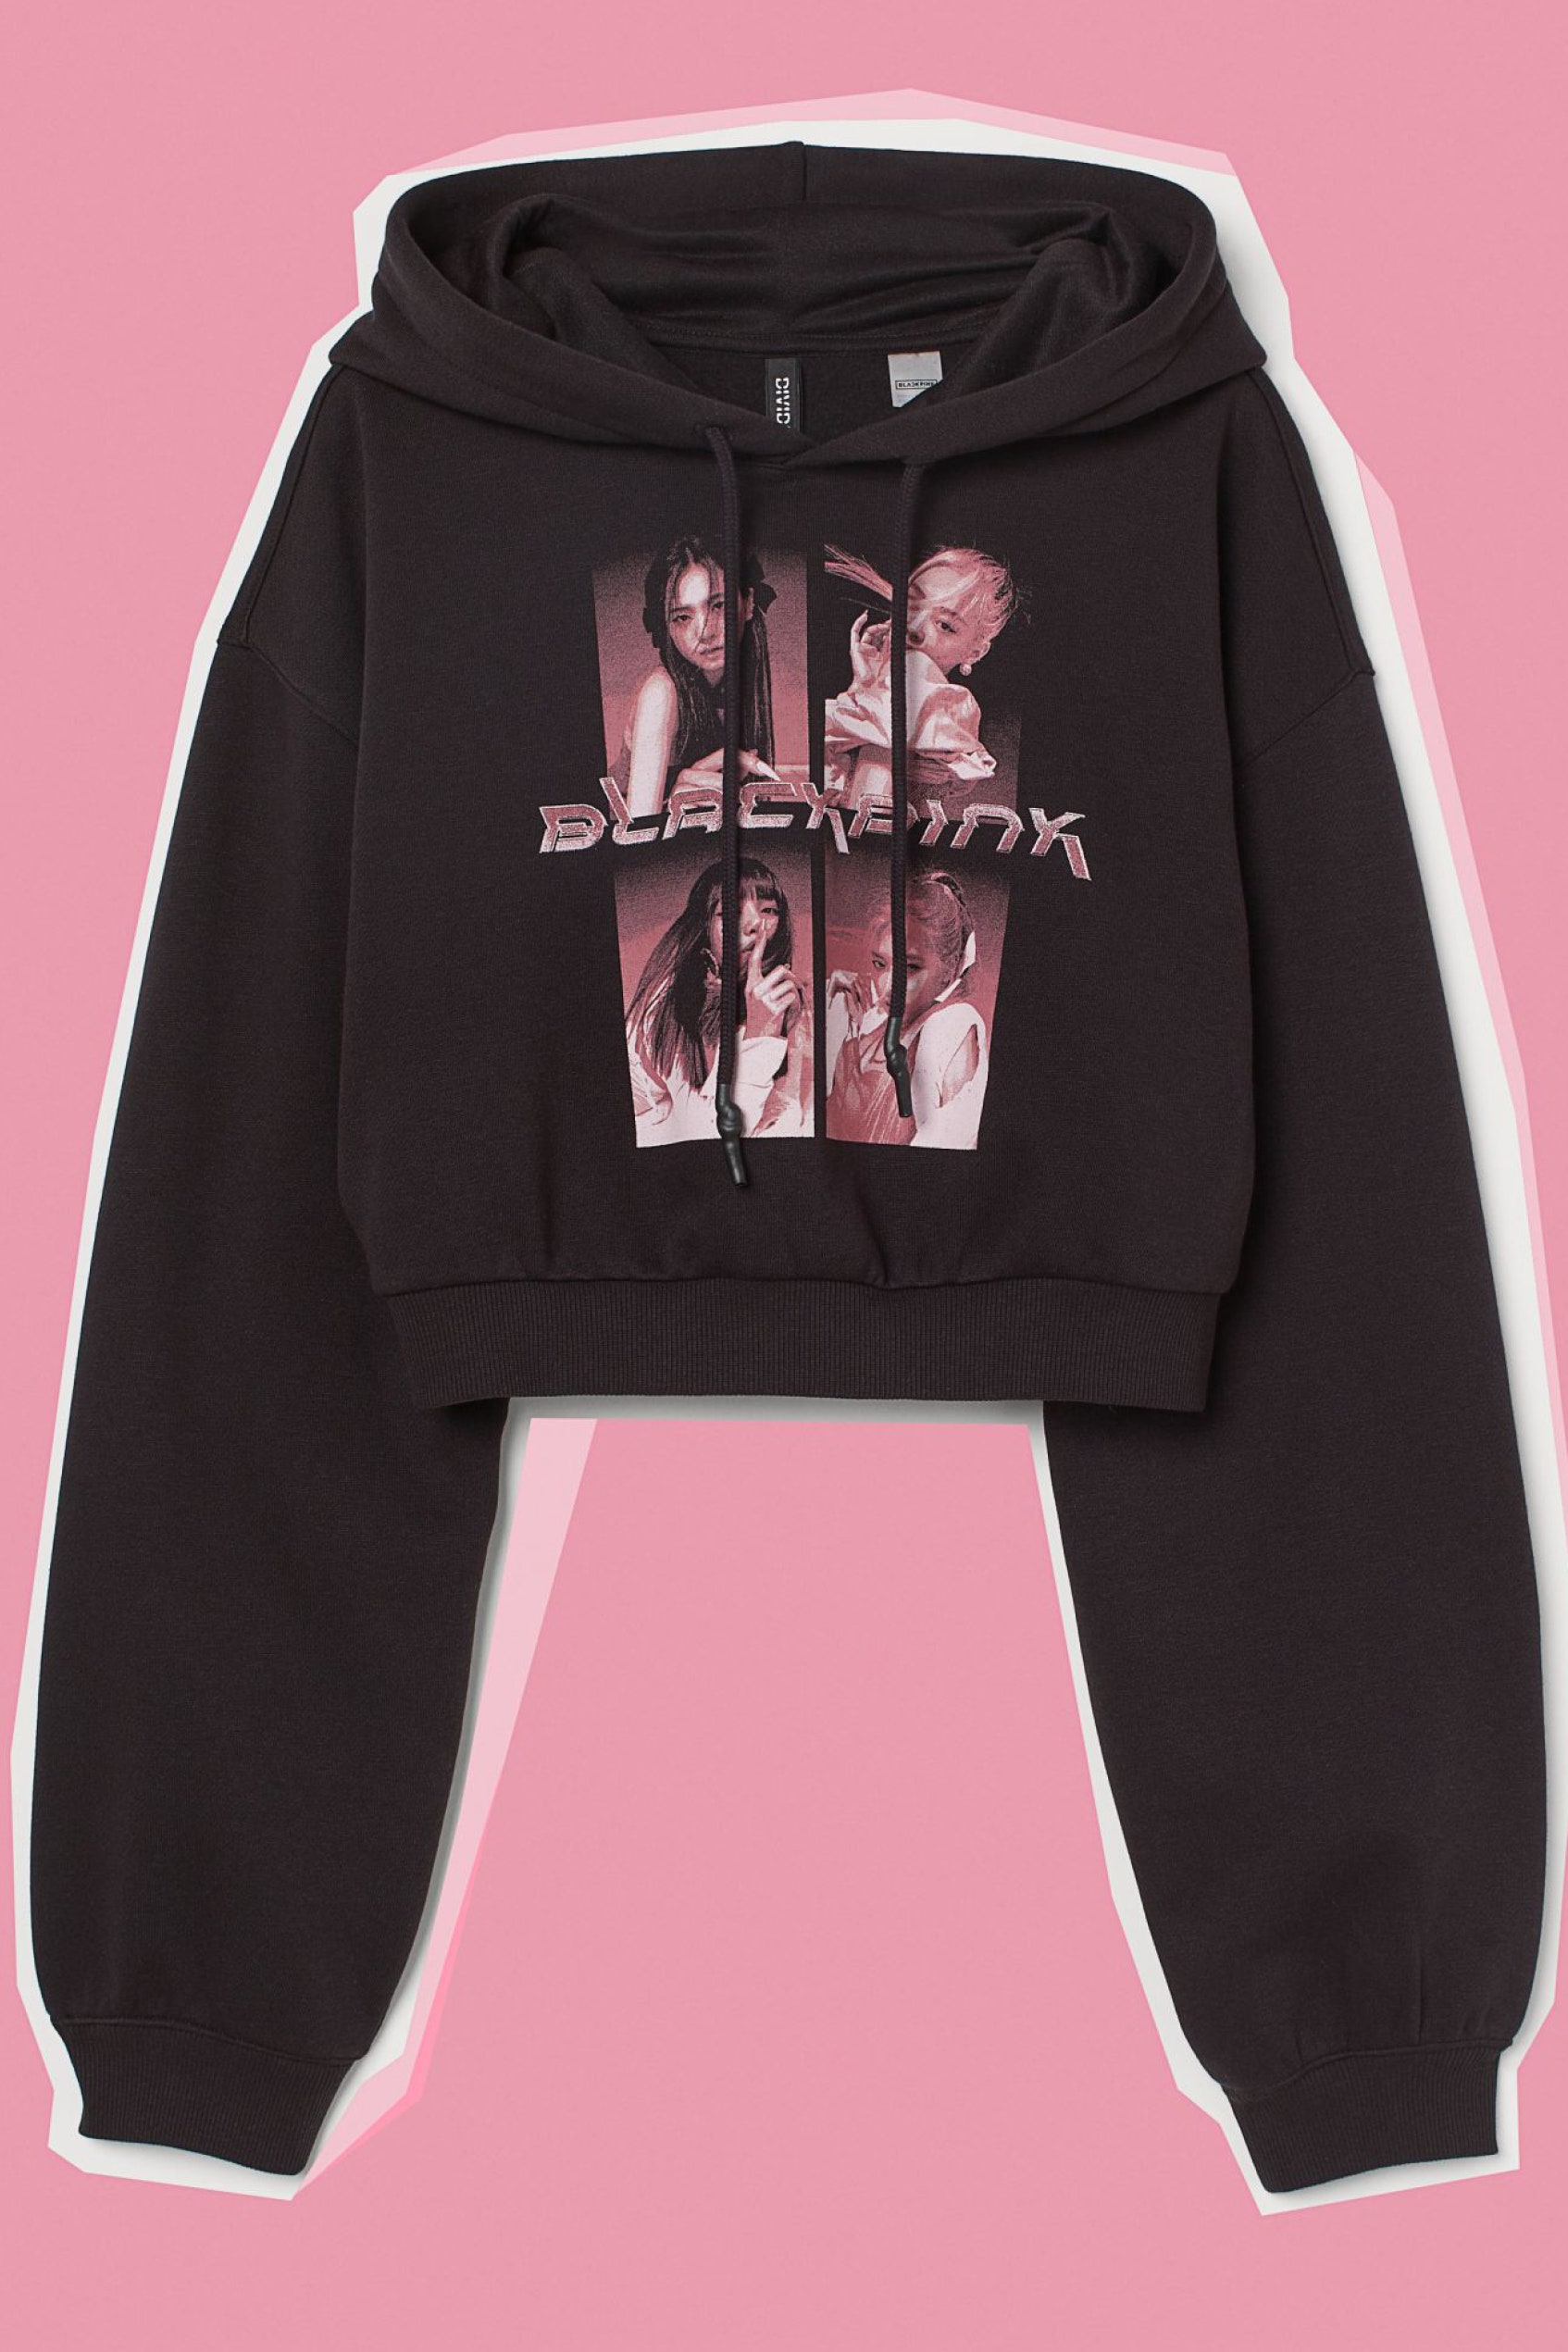 How To Turn Your Blackpink Merch H&m From Blah Into Implausible